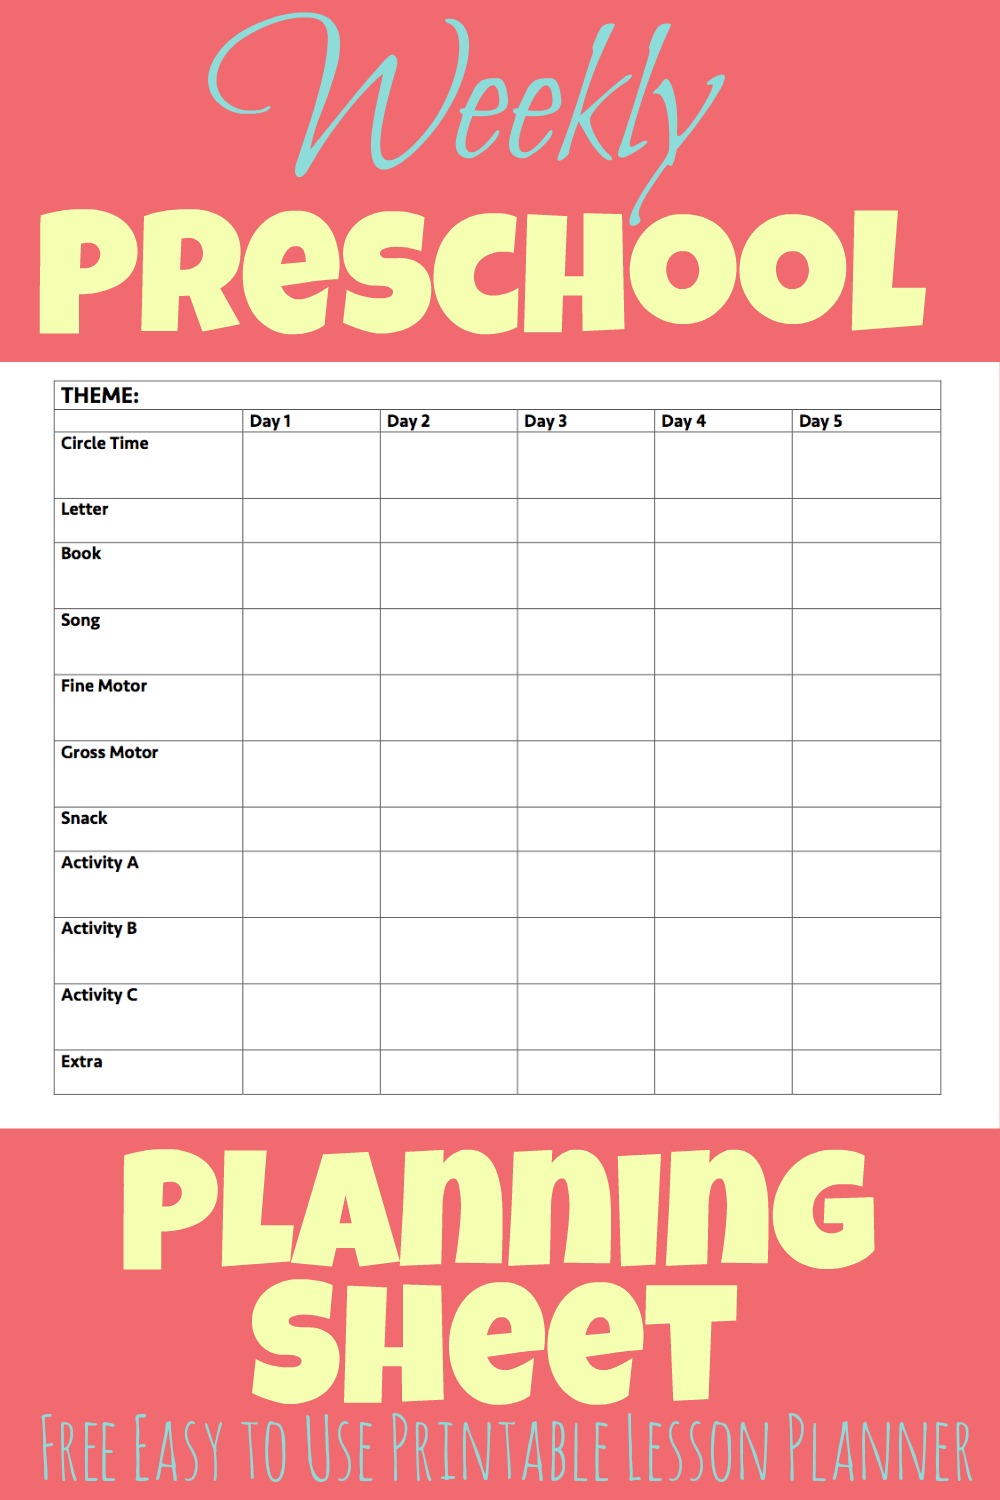 Weekly lesson planning is simple with this preschool lesson planner. Just fill in the blanks with your activity choices and your ready to go!